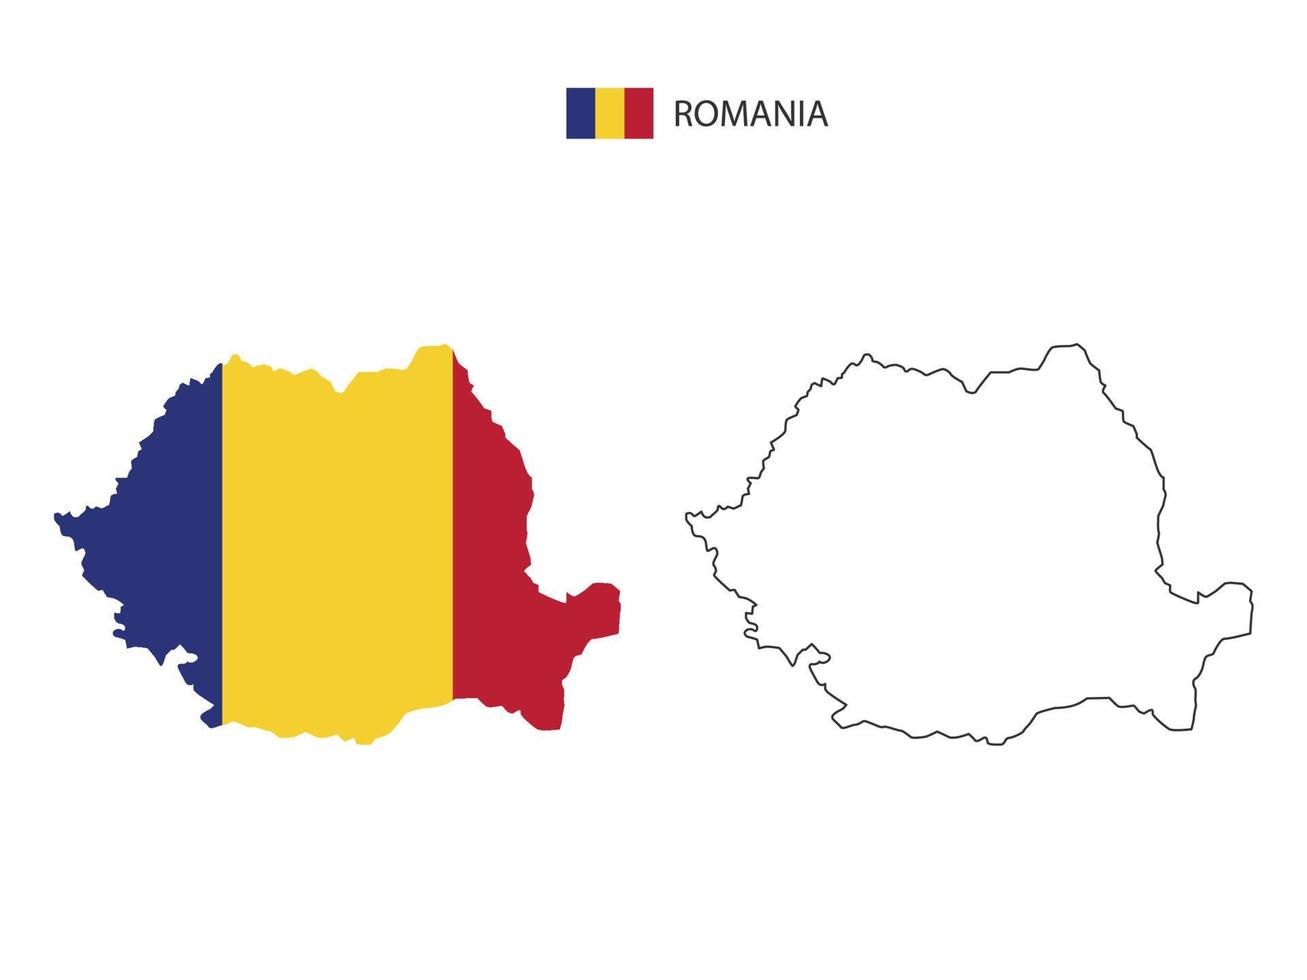 Romania map city vector divided by outline simplicity style. Have 2 versions, black thin line version and color of country flag version. Both map were on the white background.